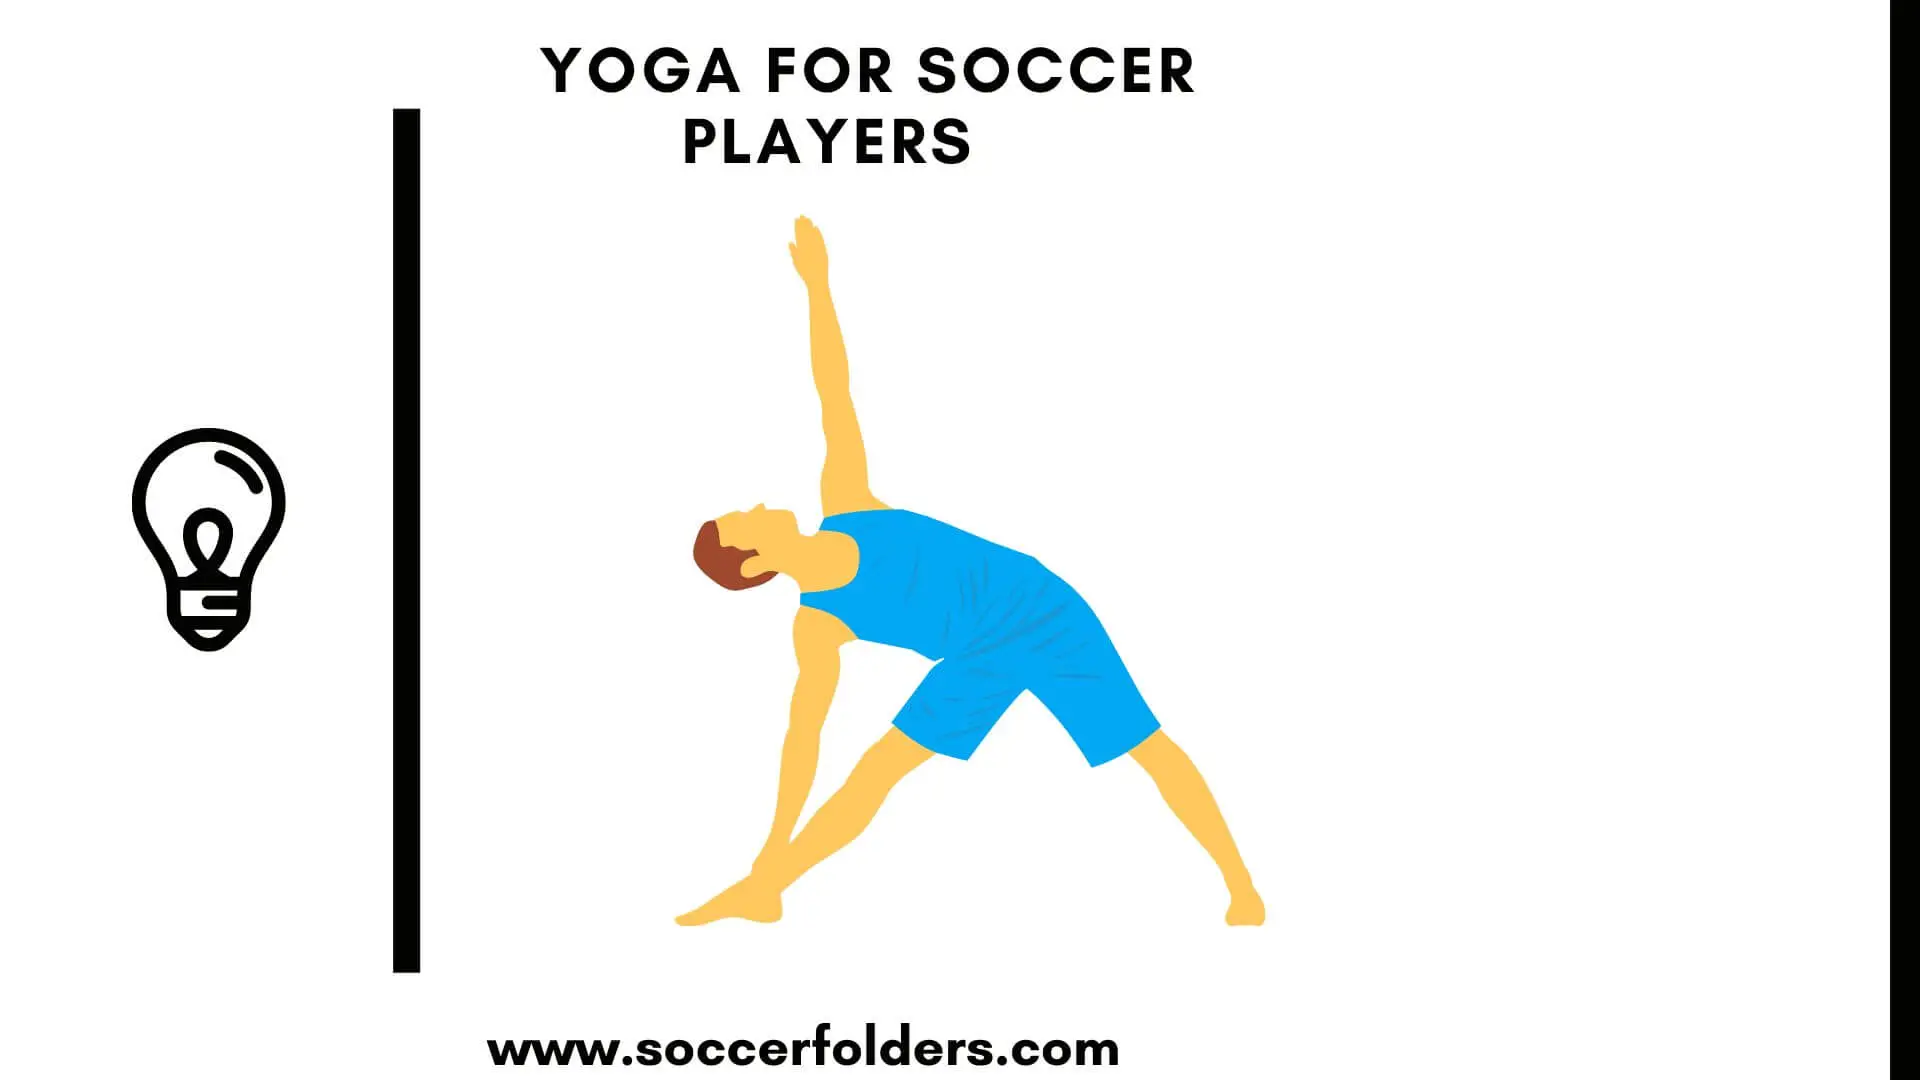 Yoga for soccer players - Featured Image